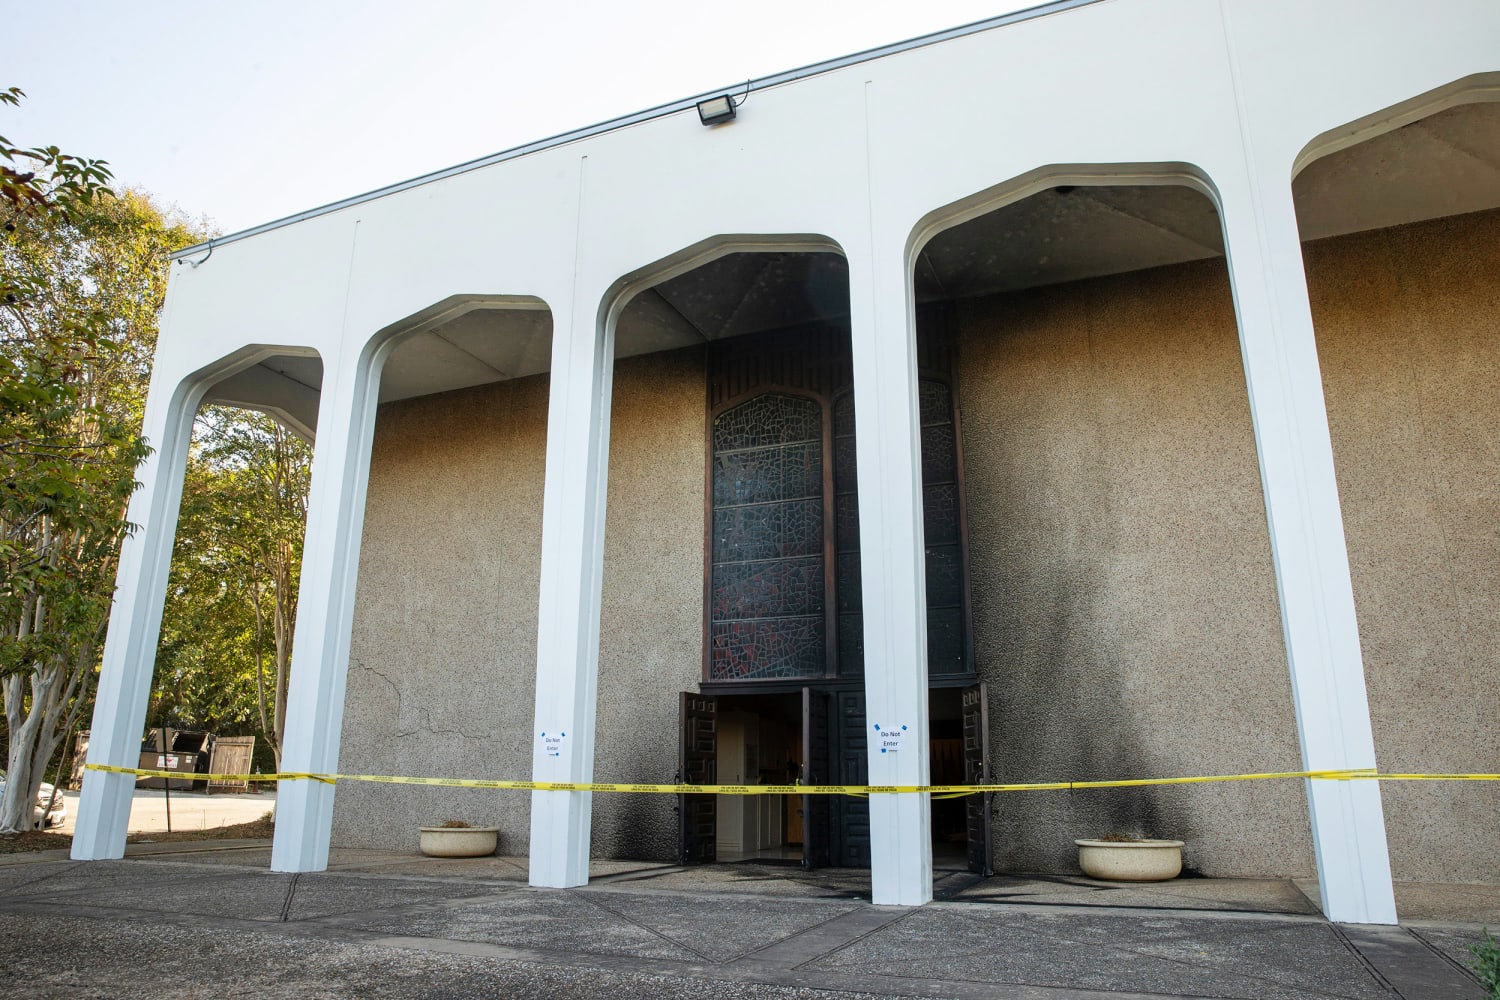 Texas State Guard member, 18, faces federal arson charge in Halloween synagogue fire